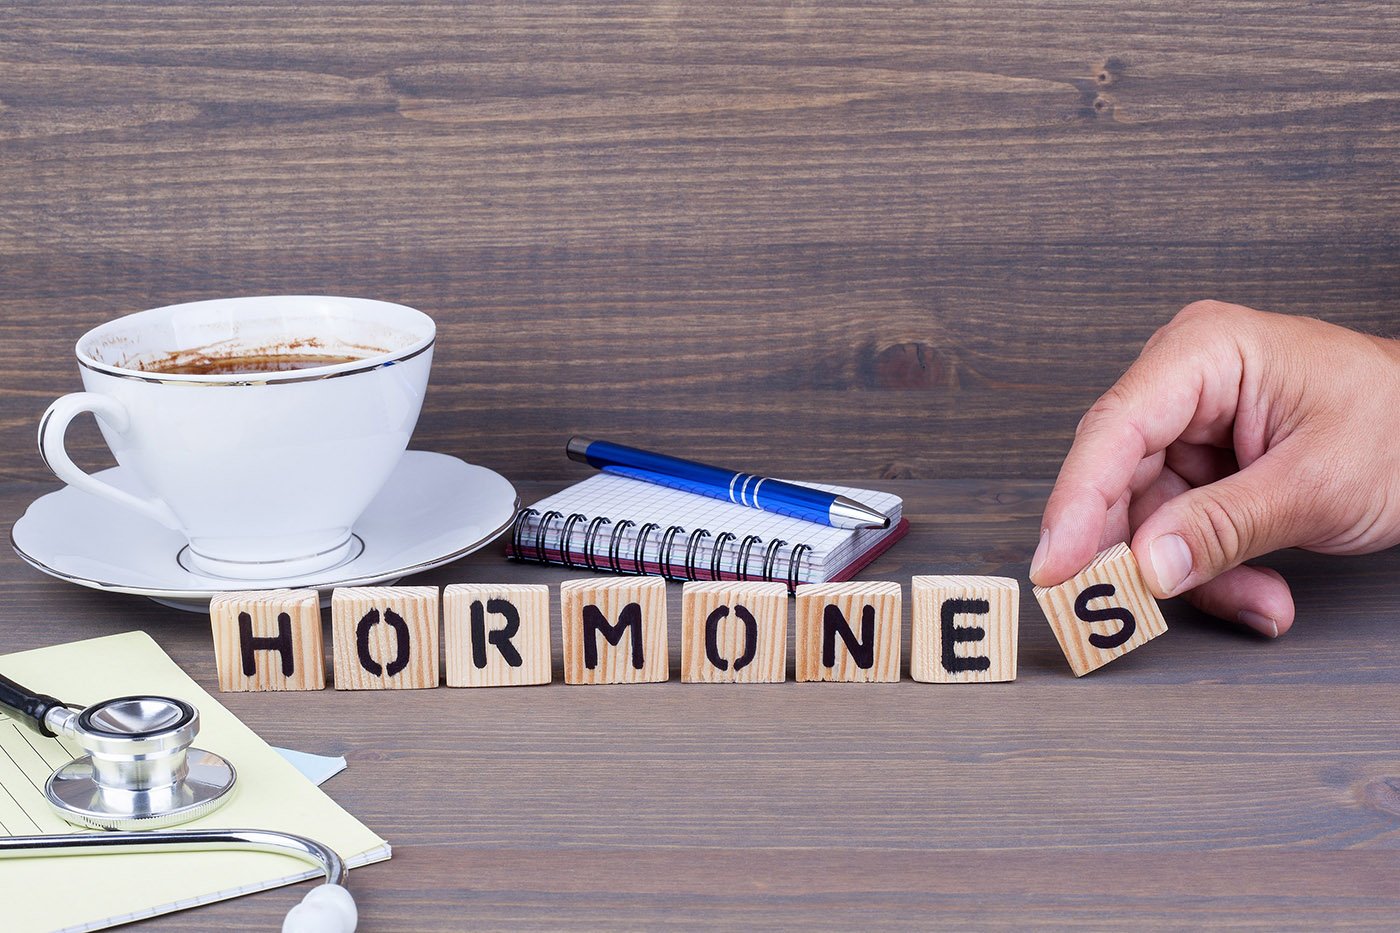 Jess Blair On How Hormones Can Affect Your Everyday Life and How to Balance Them Naturally